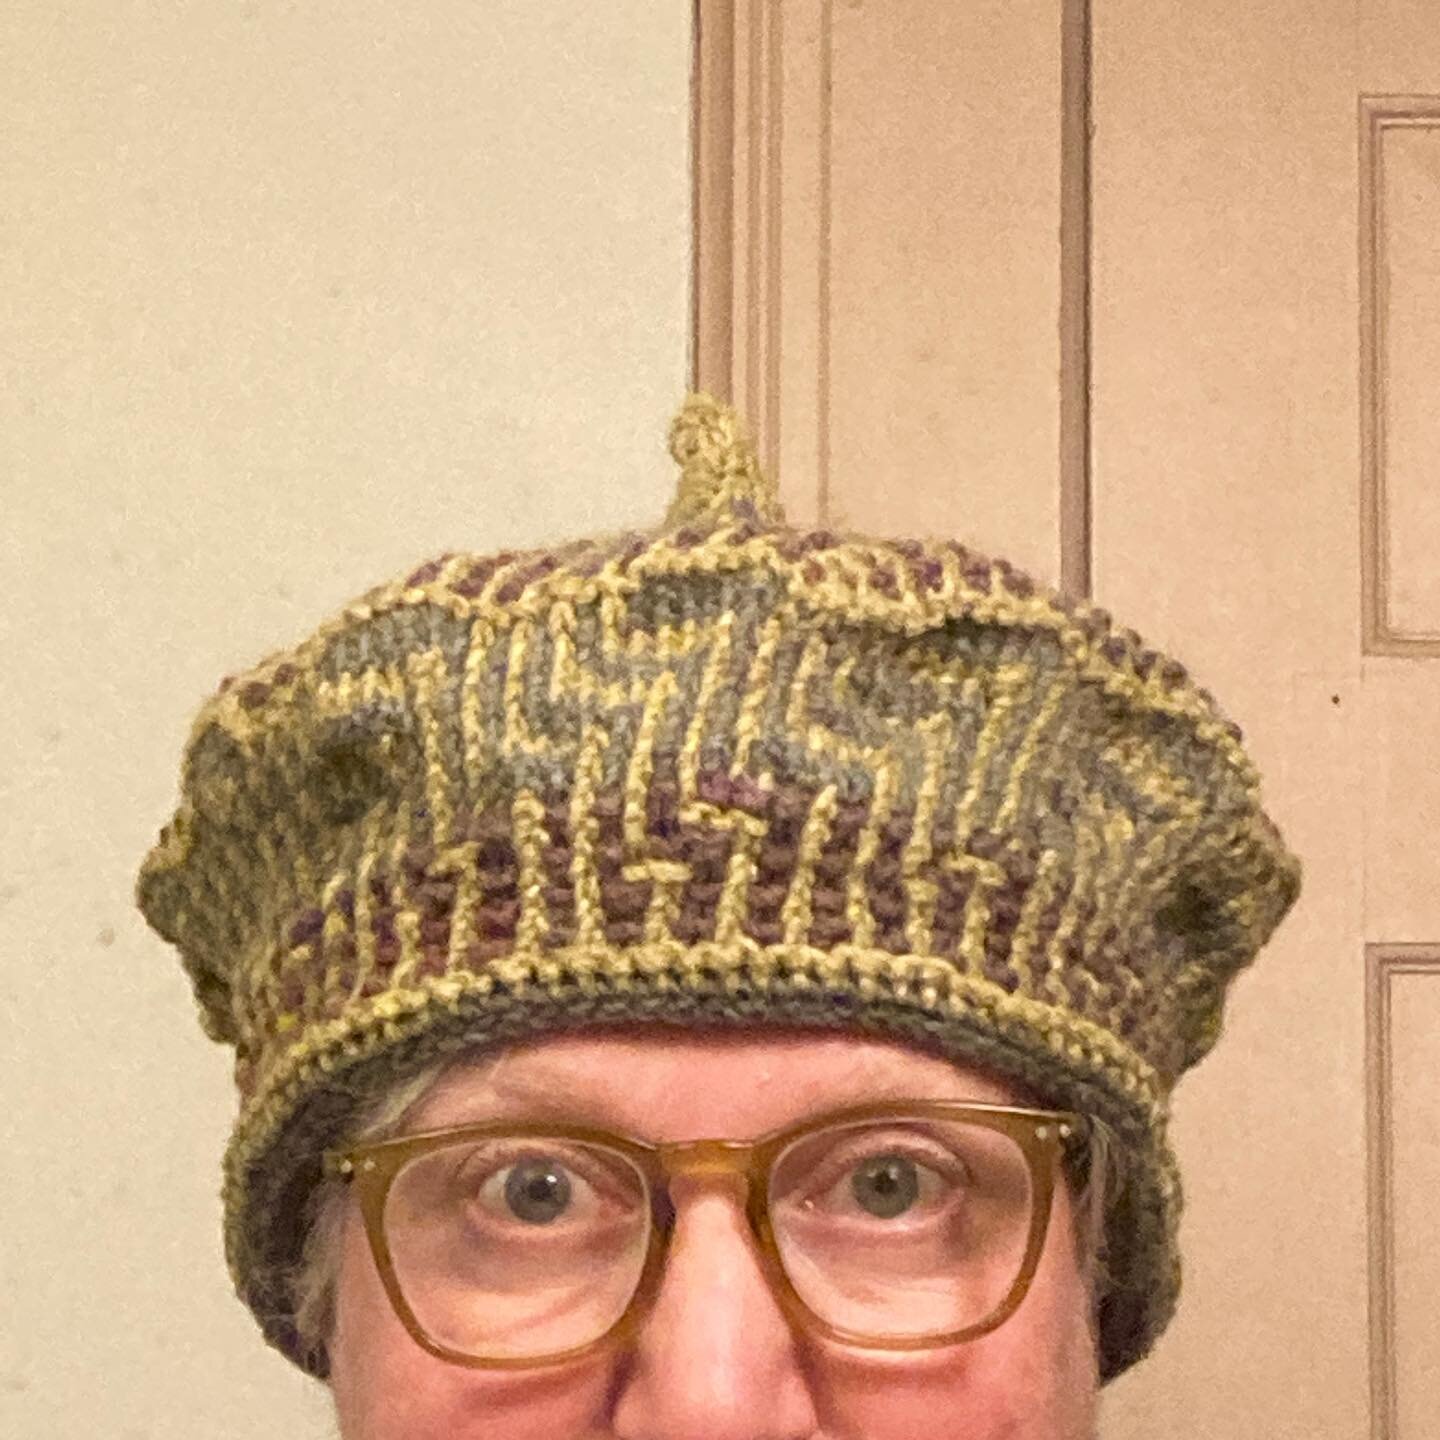 Not quite a beret, but I like it! Swipe for top view and deflated profile.
#knittedhat
#mosaicstitch
#finished
#okwhatsnext